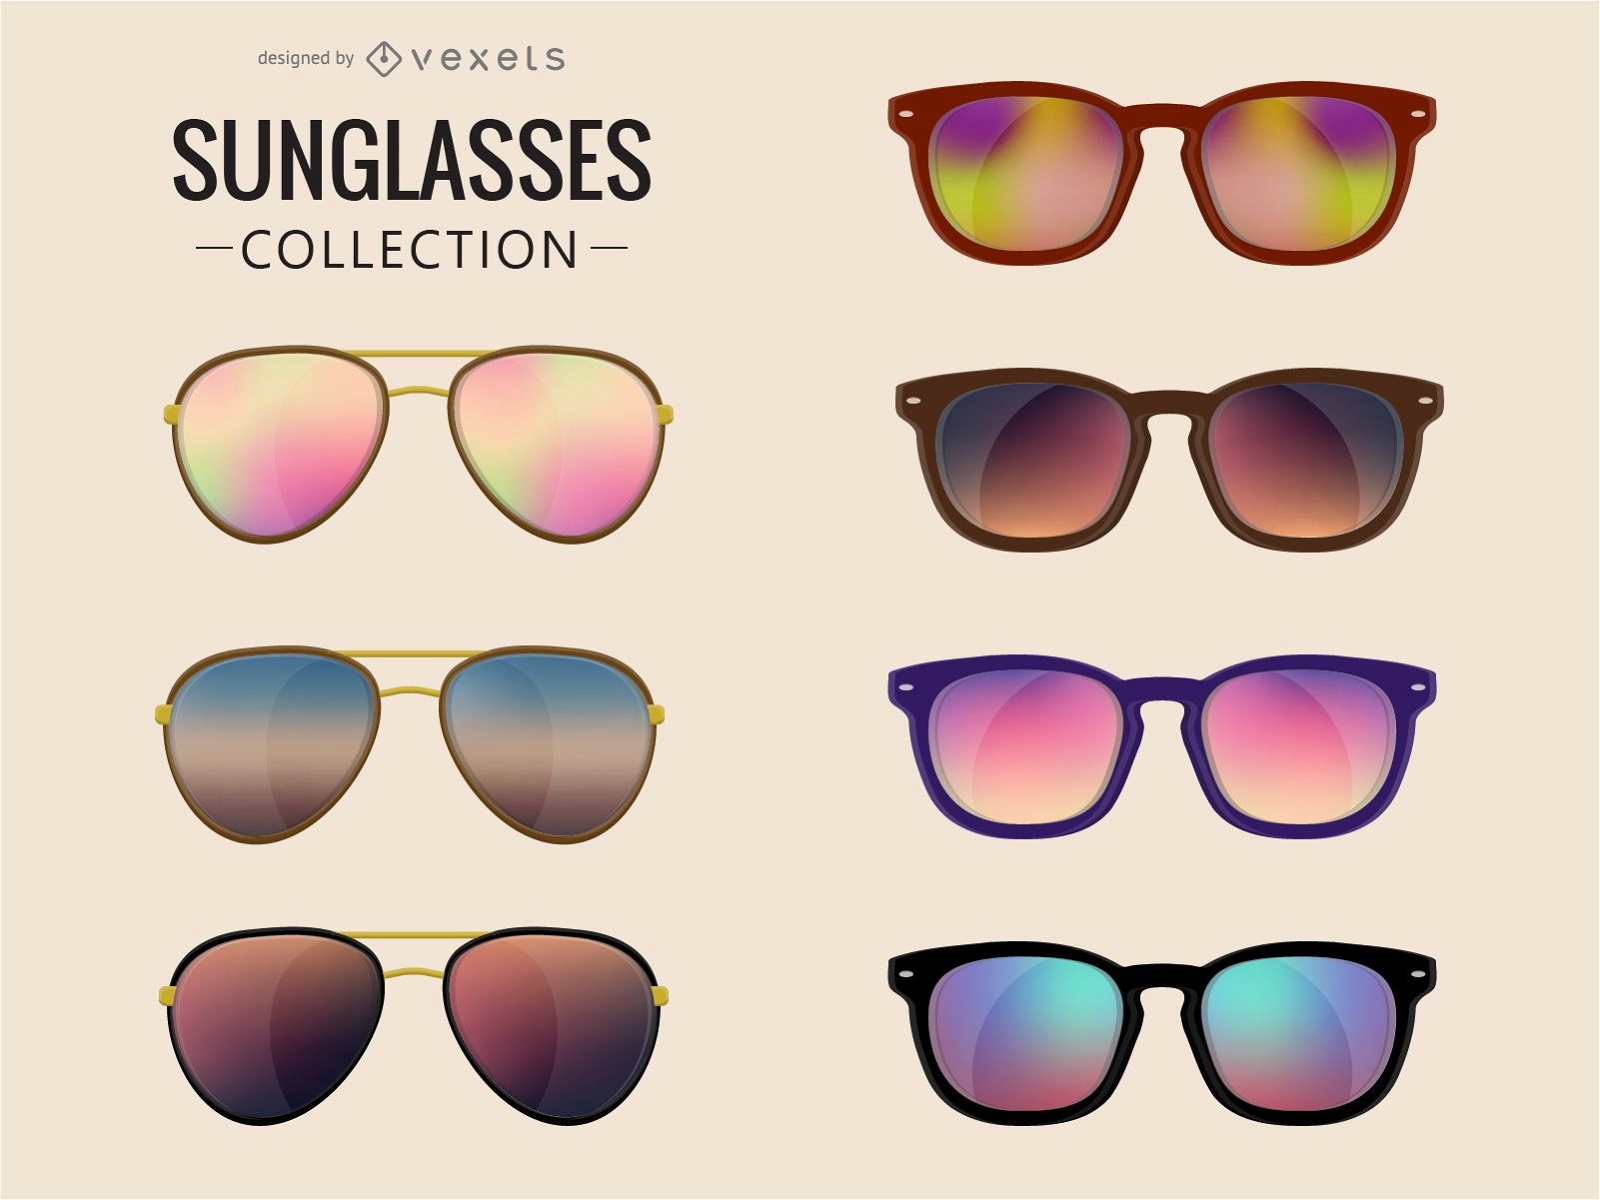 Illustrated sunglasses collection